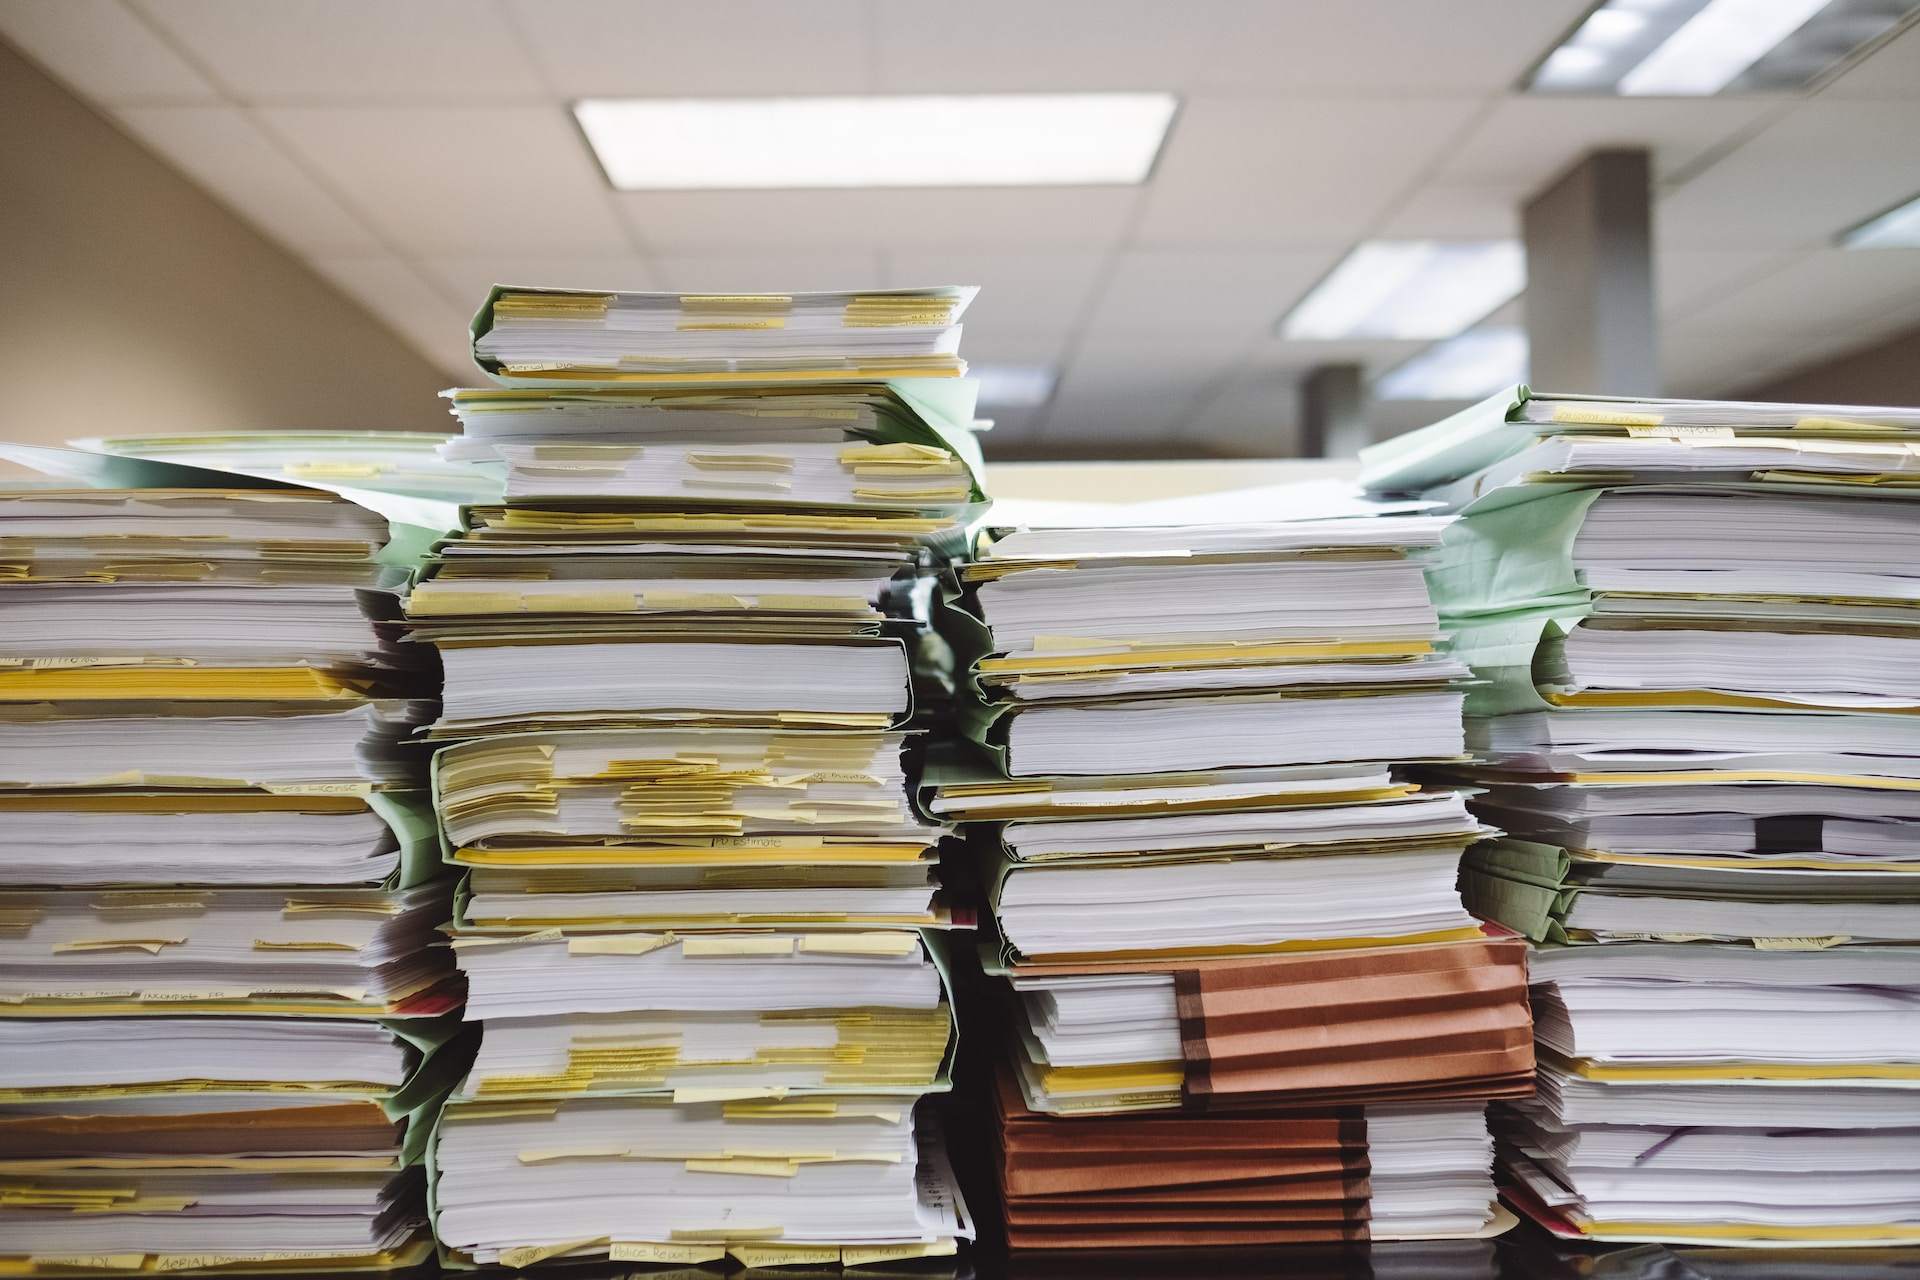 A stack of files in an office